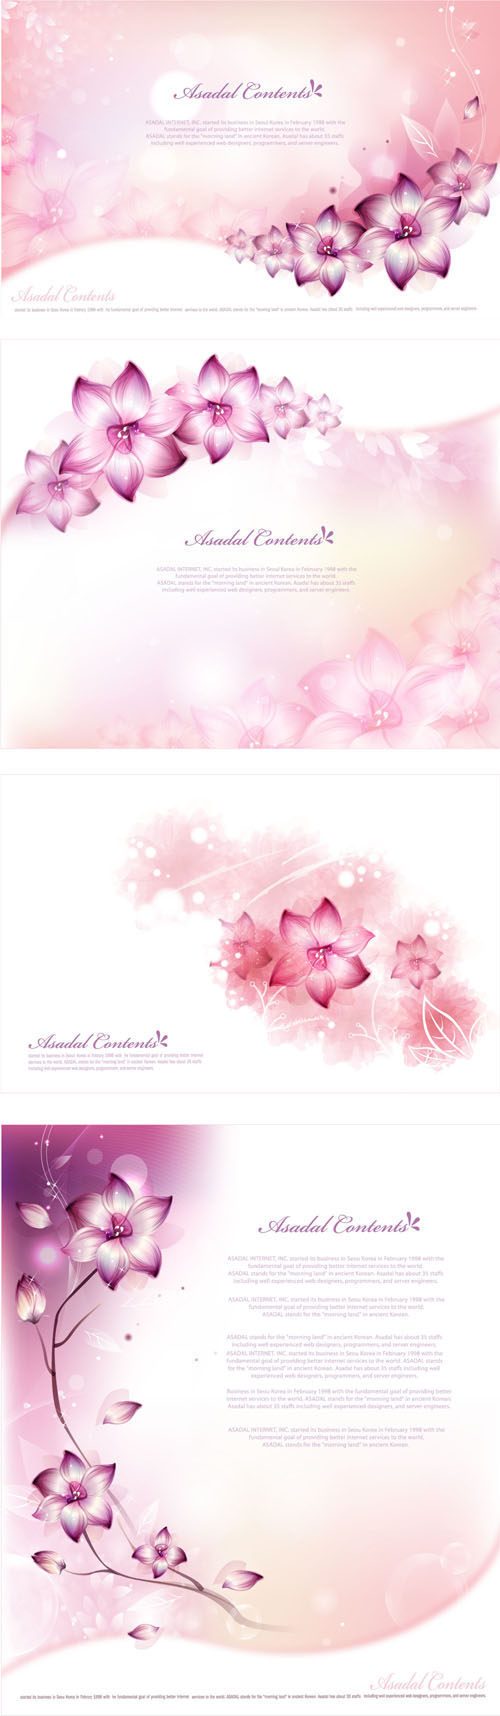 flowers flower brilliant background material background 